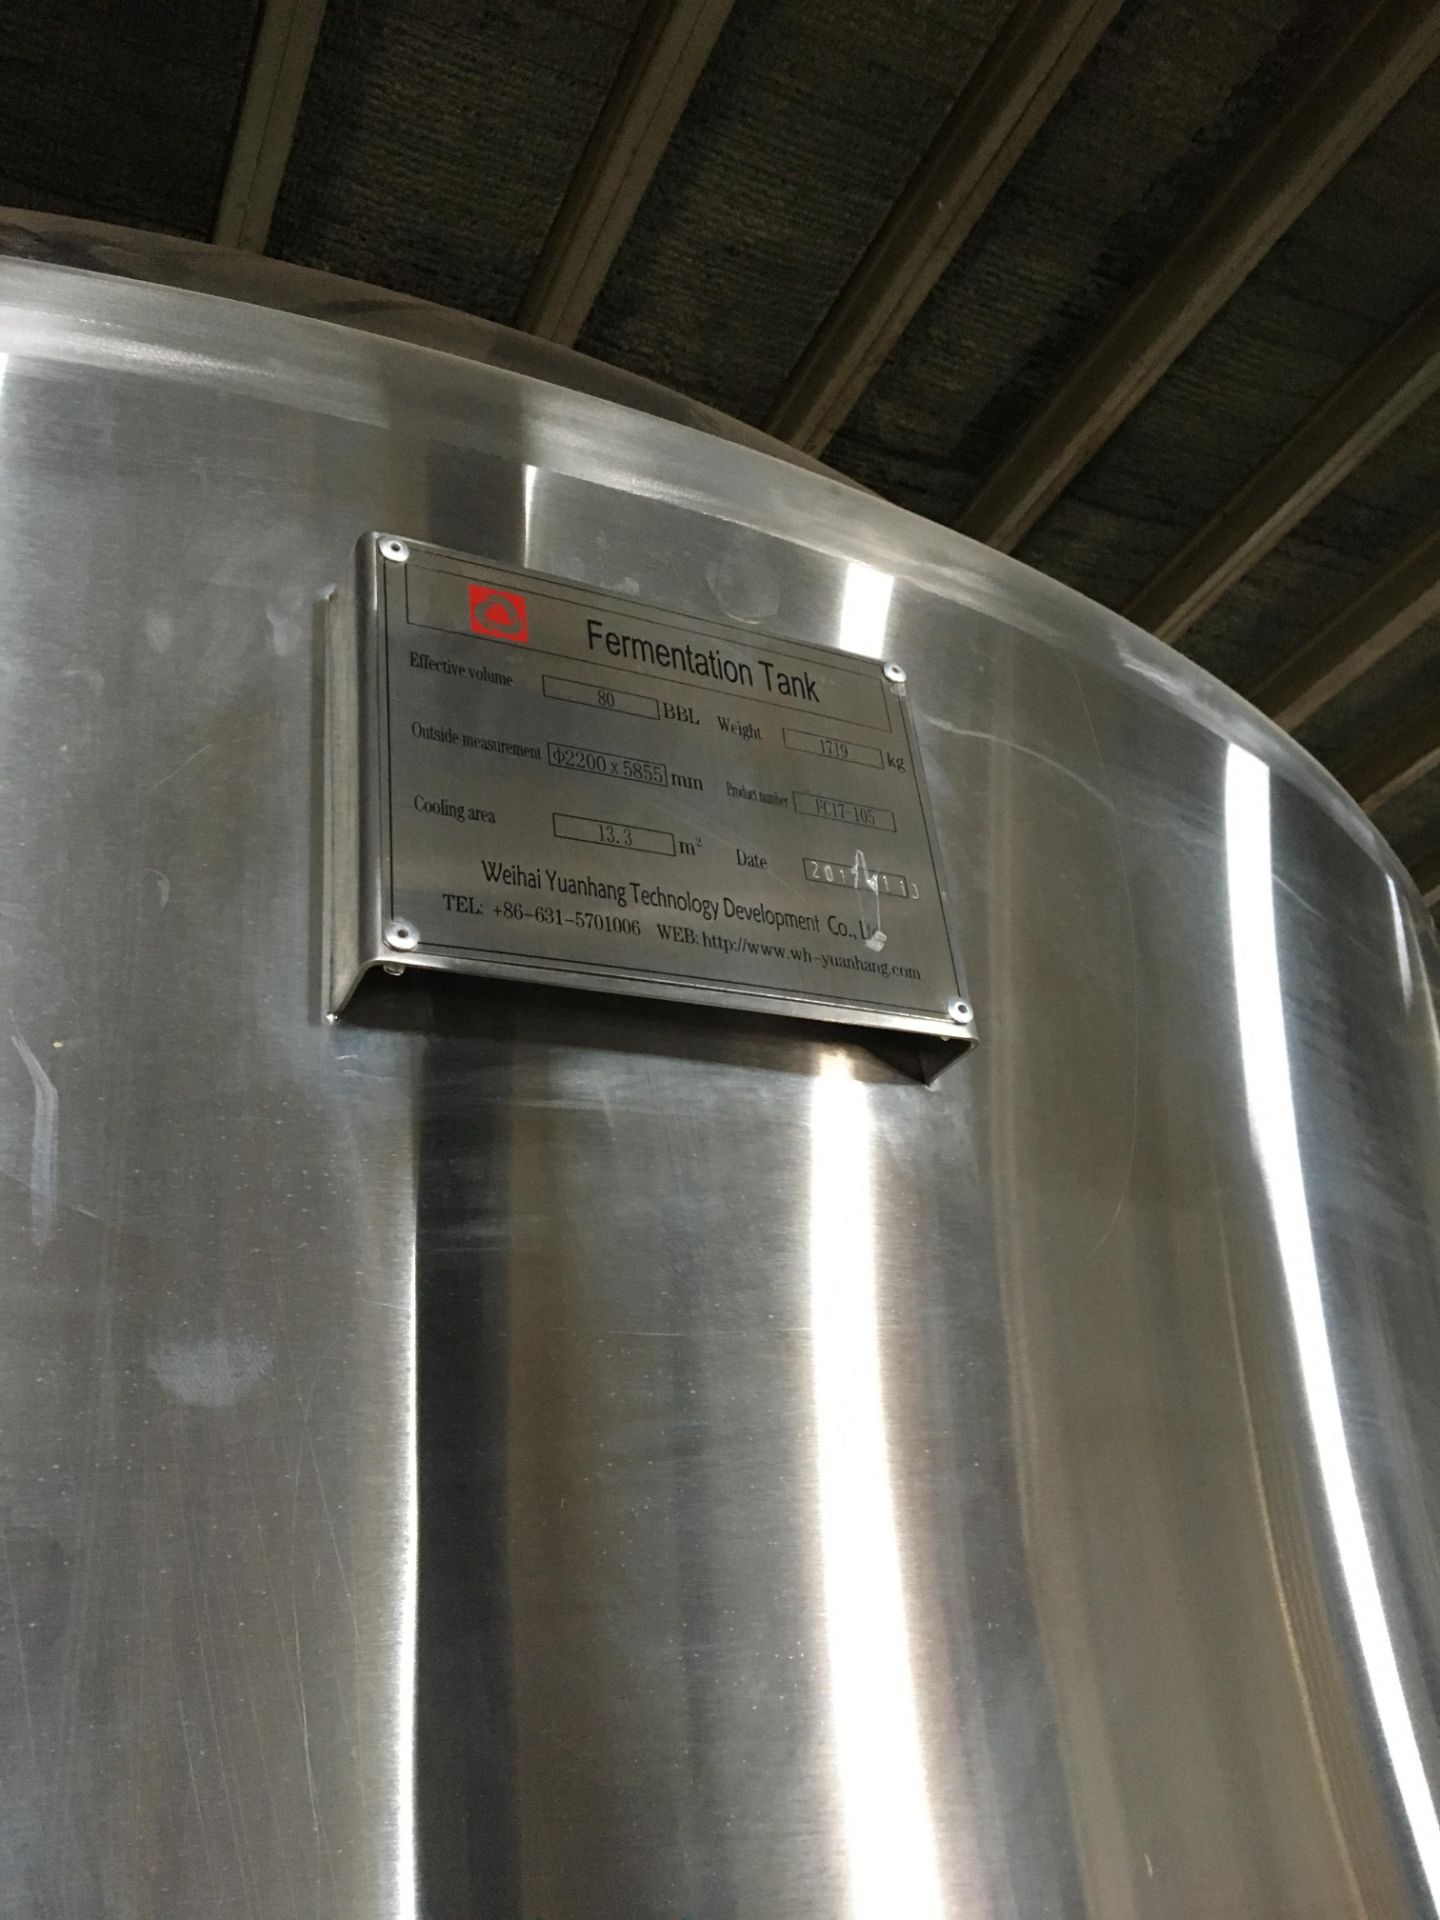 80-BBL Minnetonka Fermentation Tank, Model 80-BBL, Year 2017, Stainless Steel; Vessel store wort and - Image 14 of 17